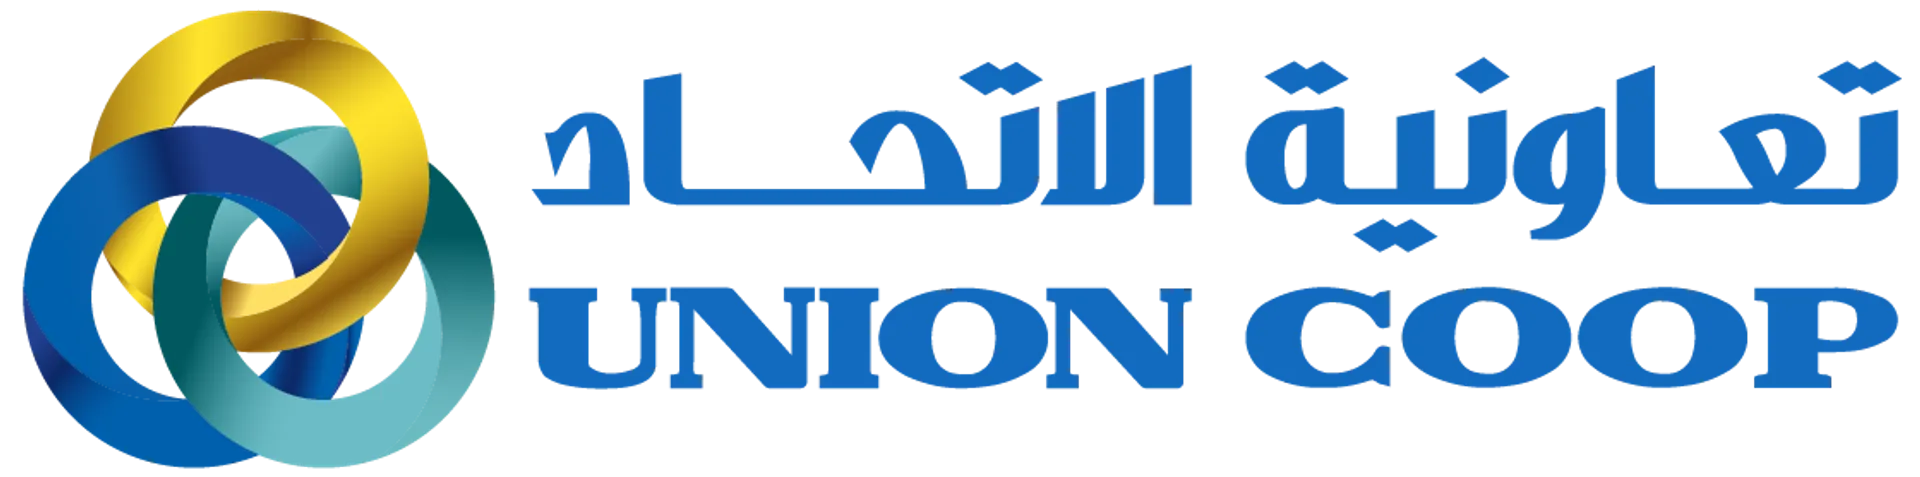 UNION COOP logo. Current weekly ad